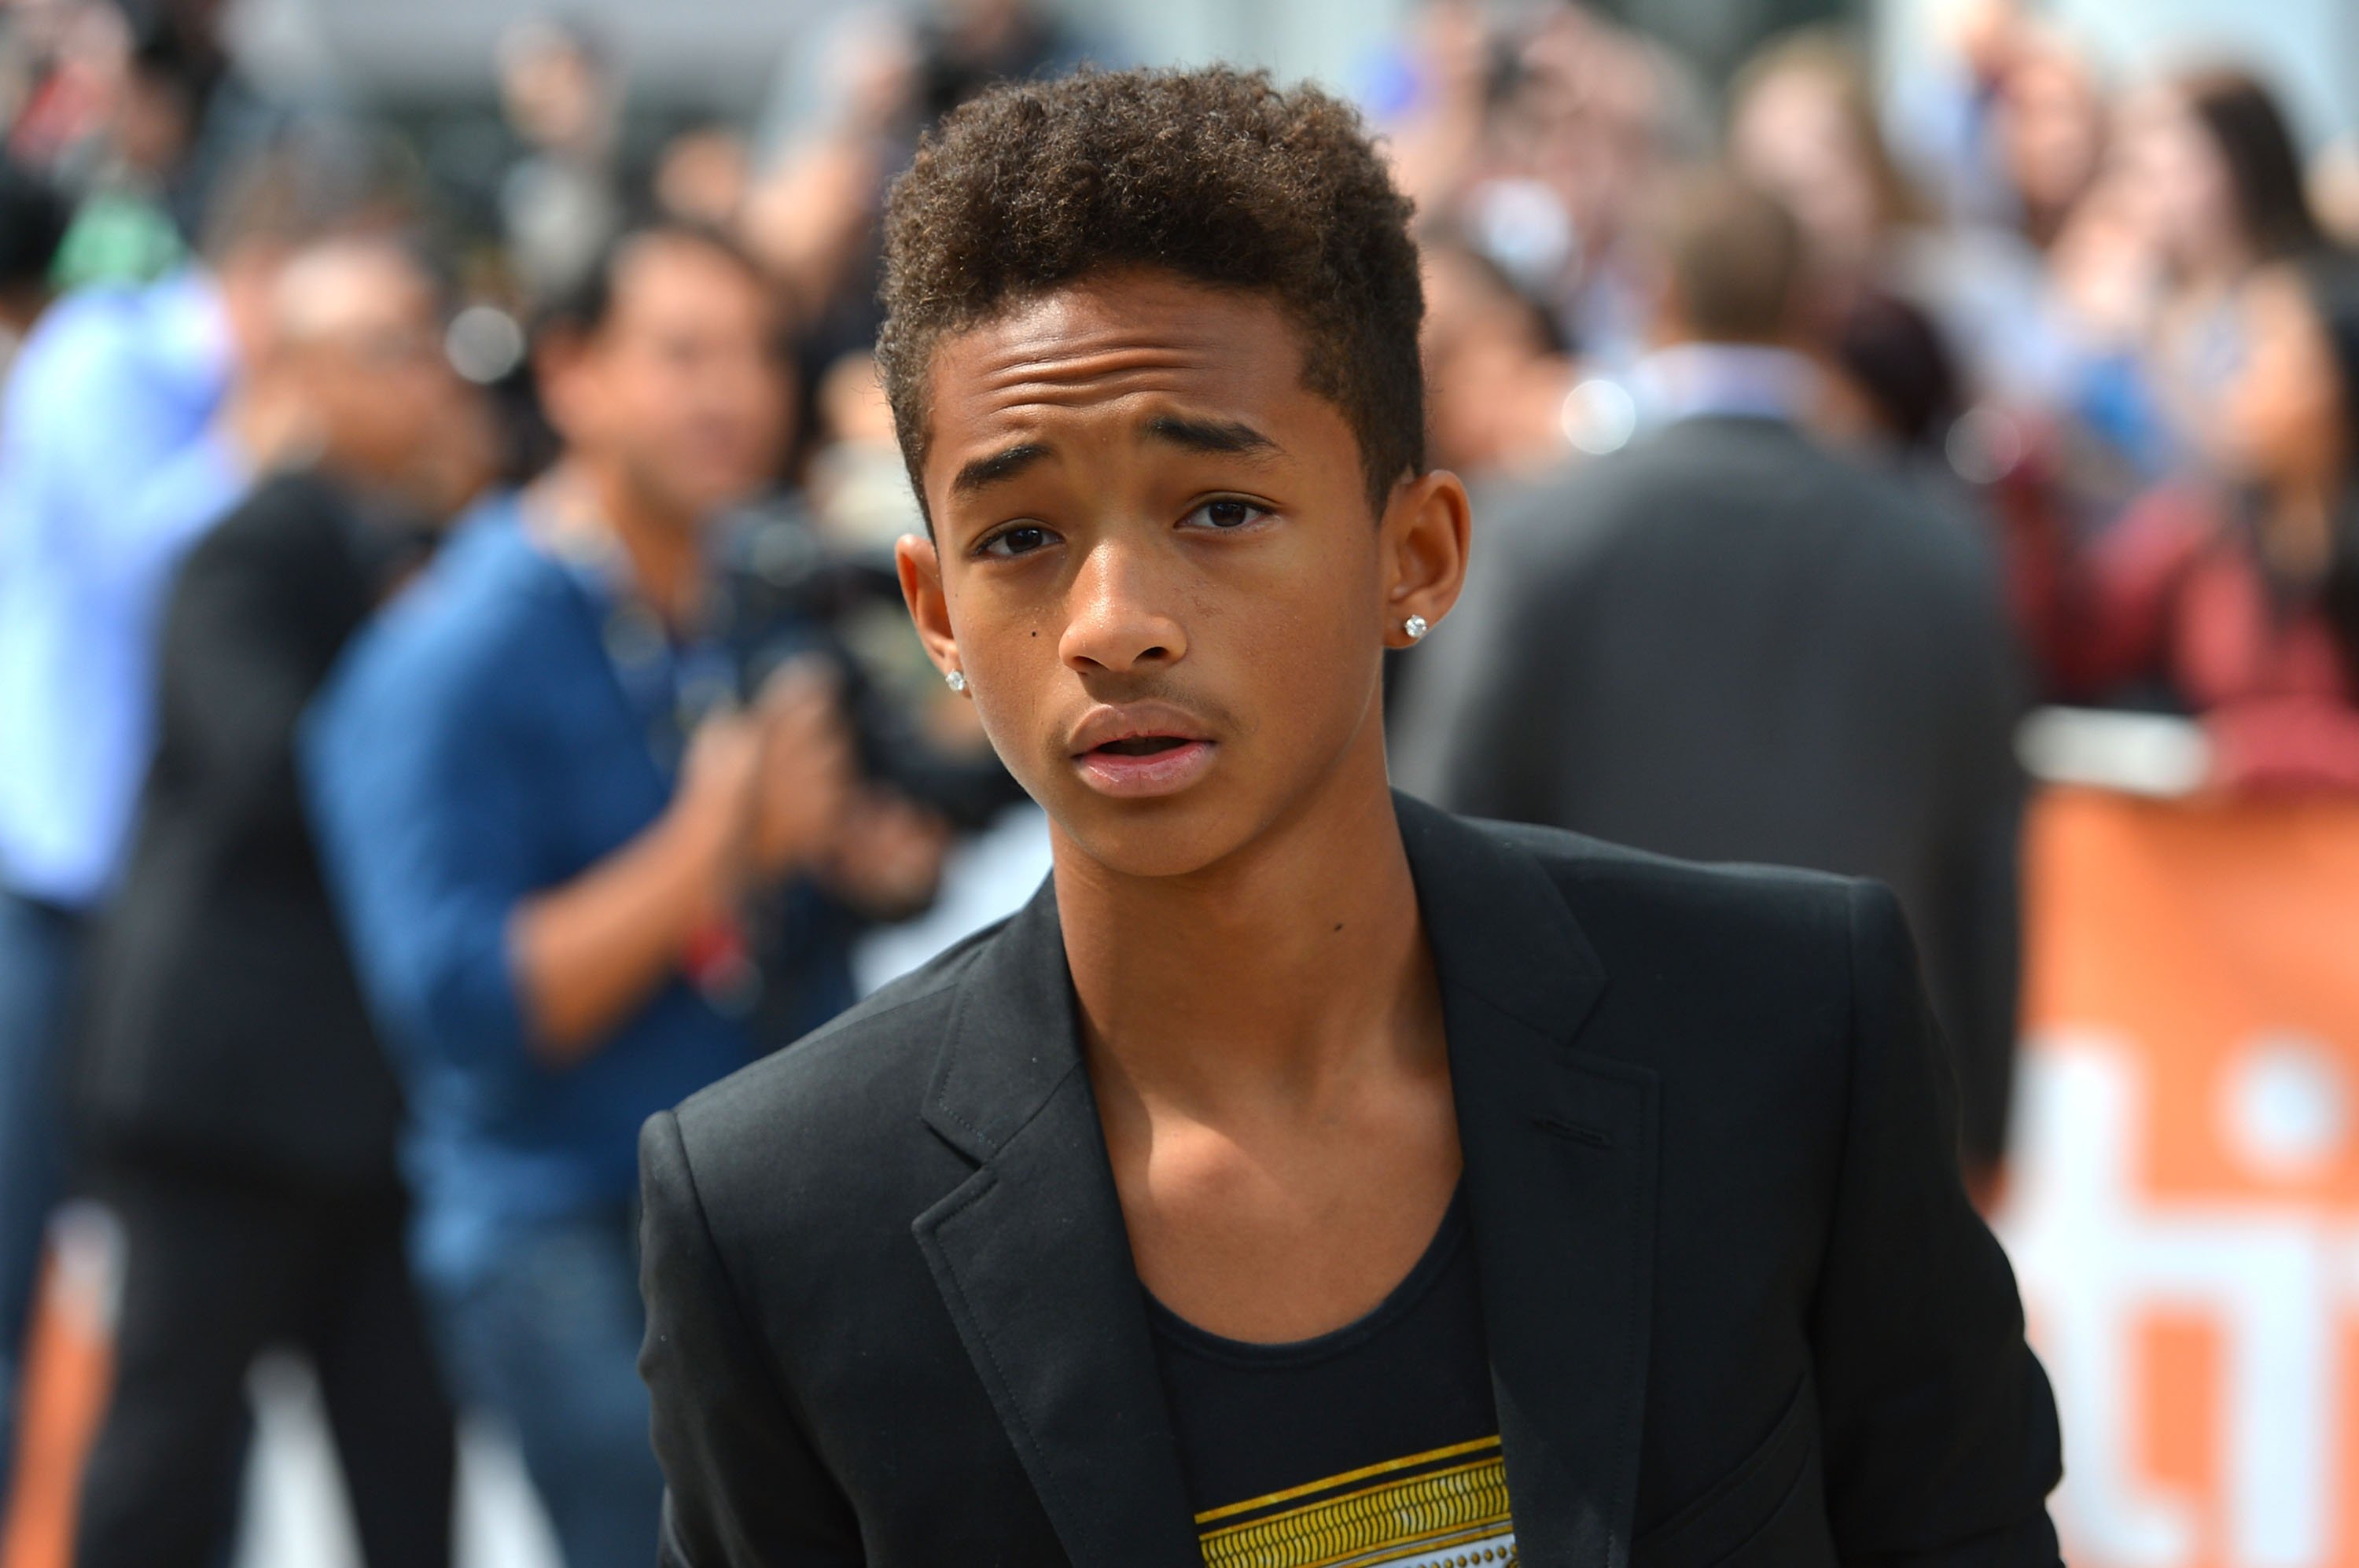 Jaden Smith wears white Batsuit to Prom, Page 3